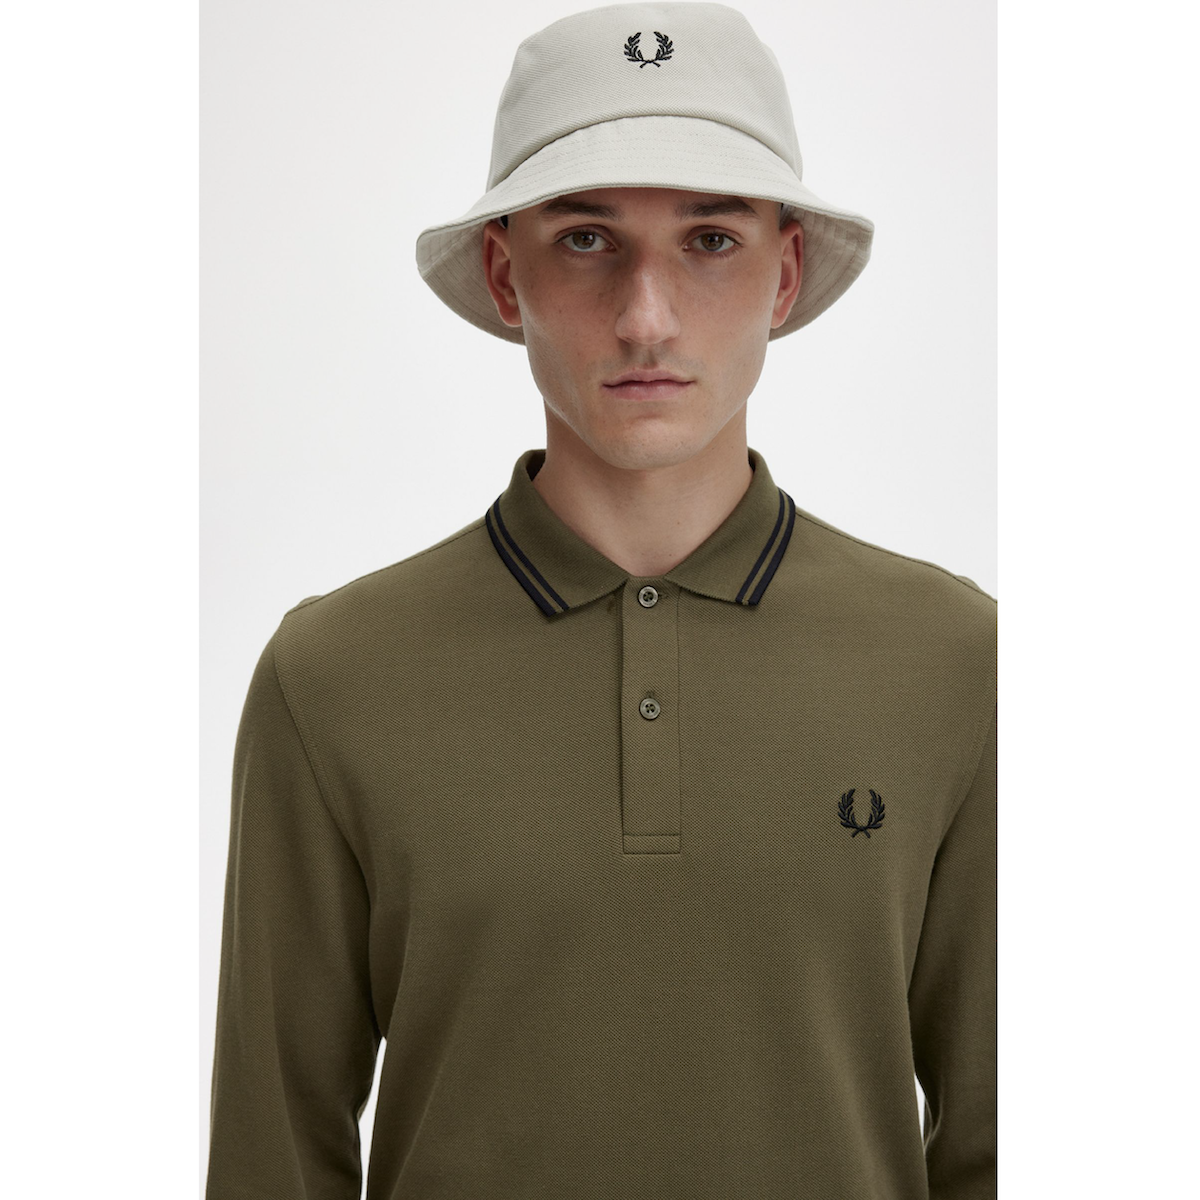 Fred Perry Long-Sleeved Twin-Tipped Shirt — Uniform Green/Black